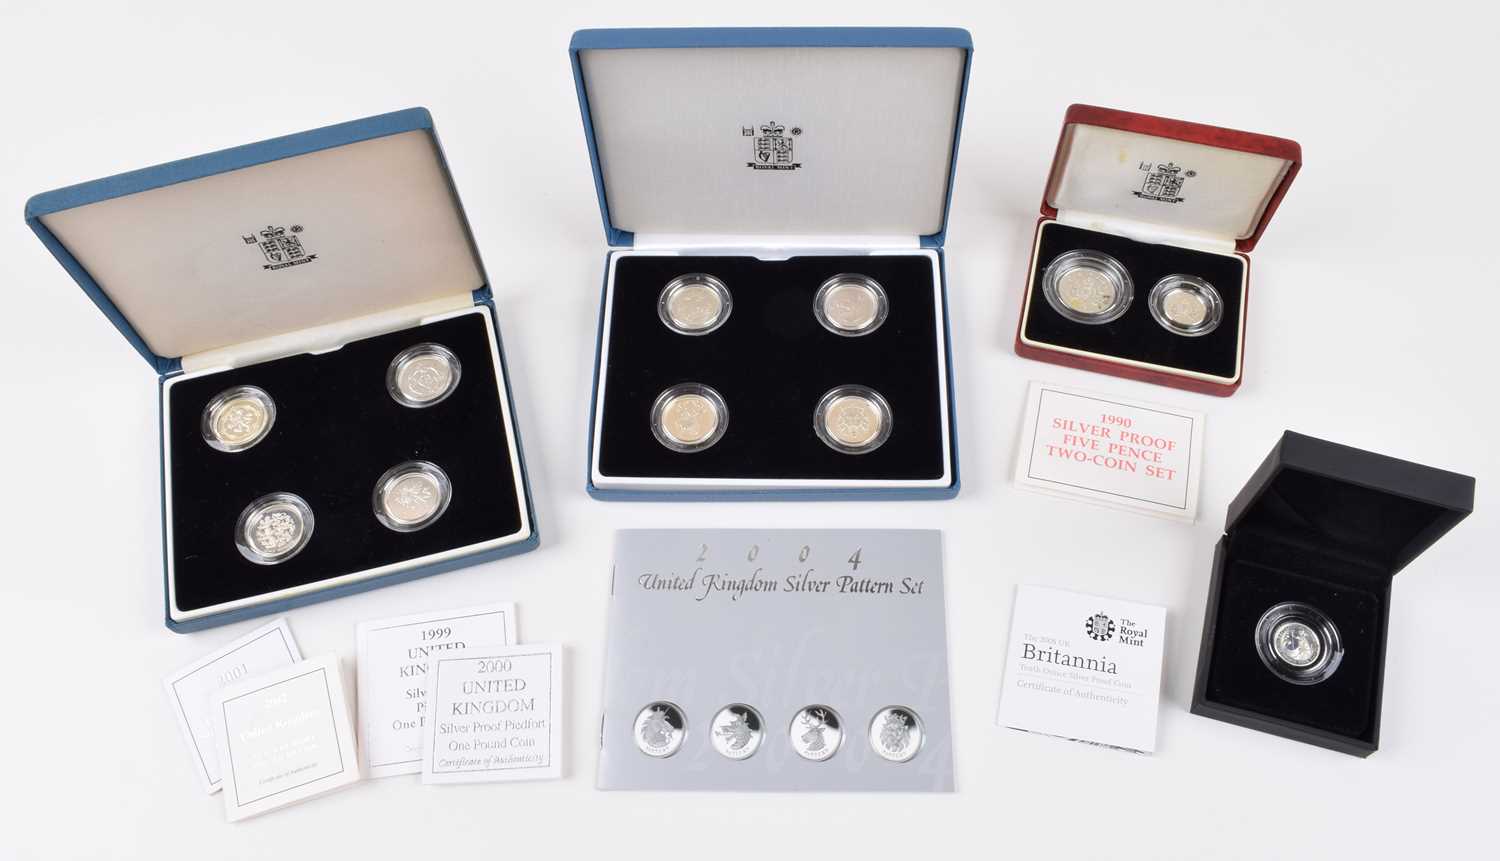 Lot 6 - Four Royal Mint Silver Proof Coins and Coin Sets (4).